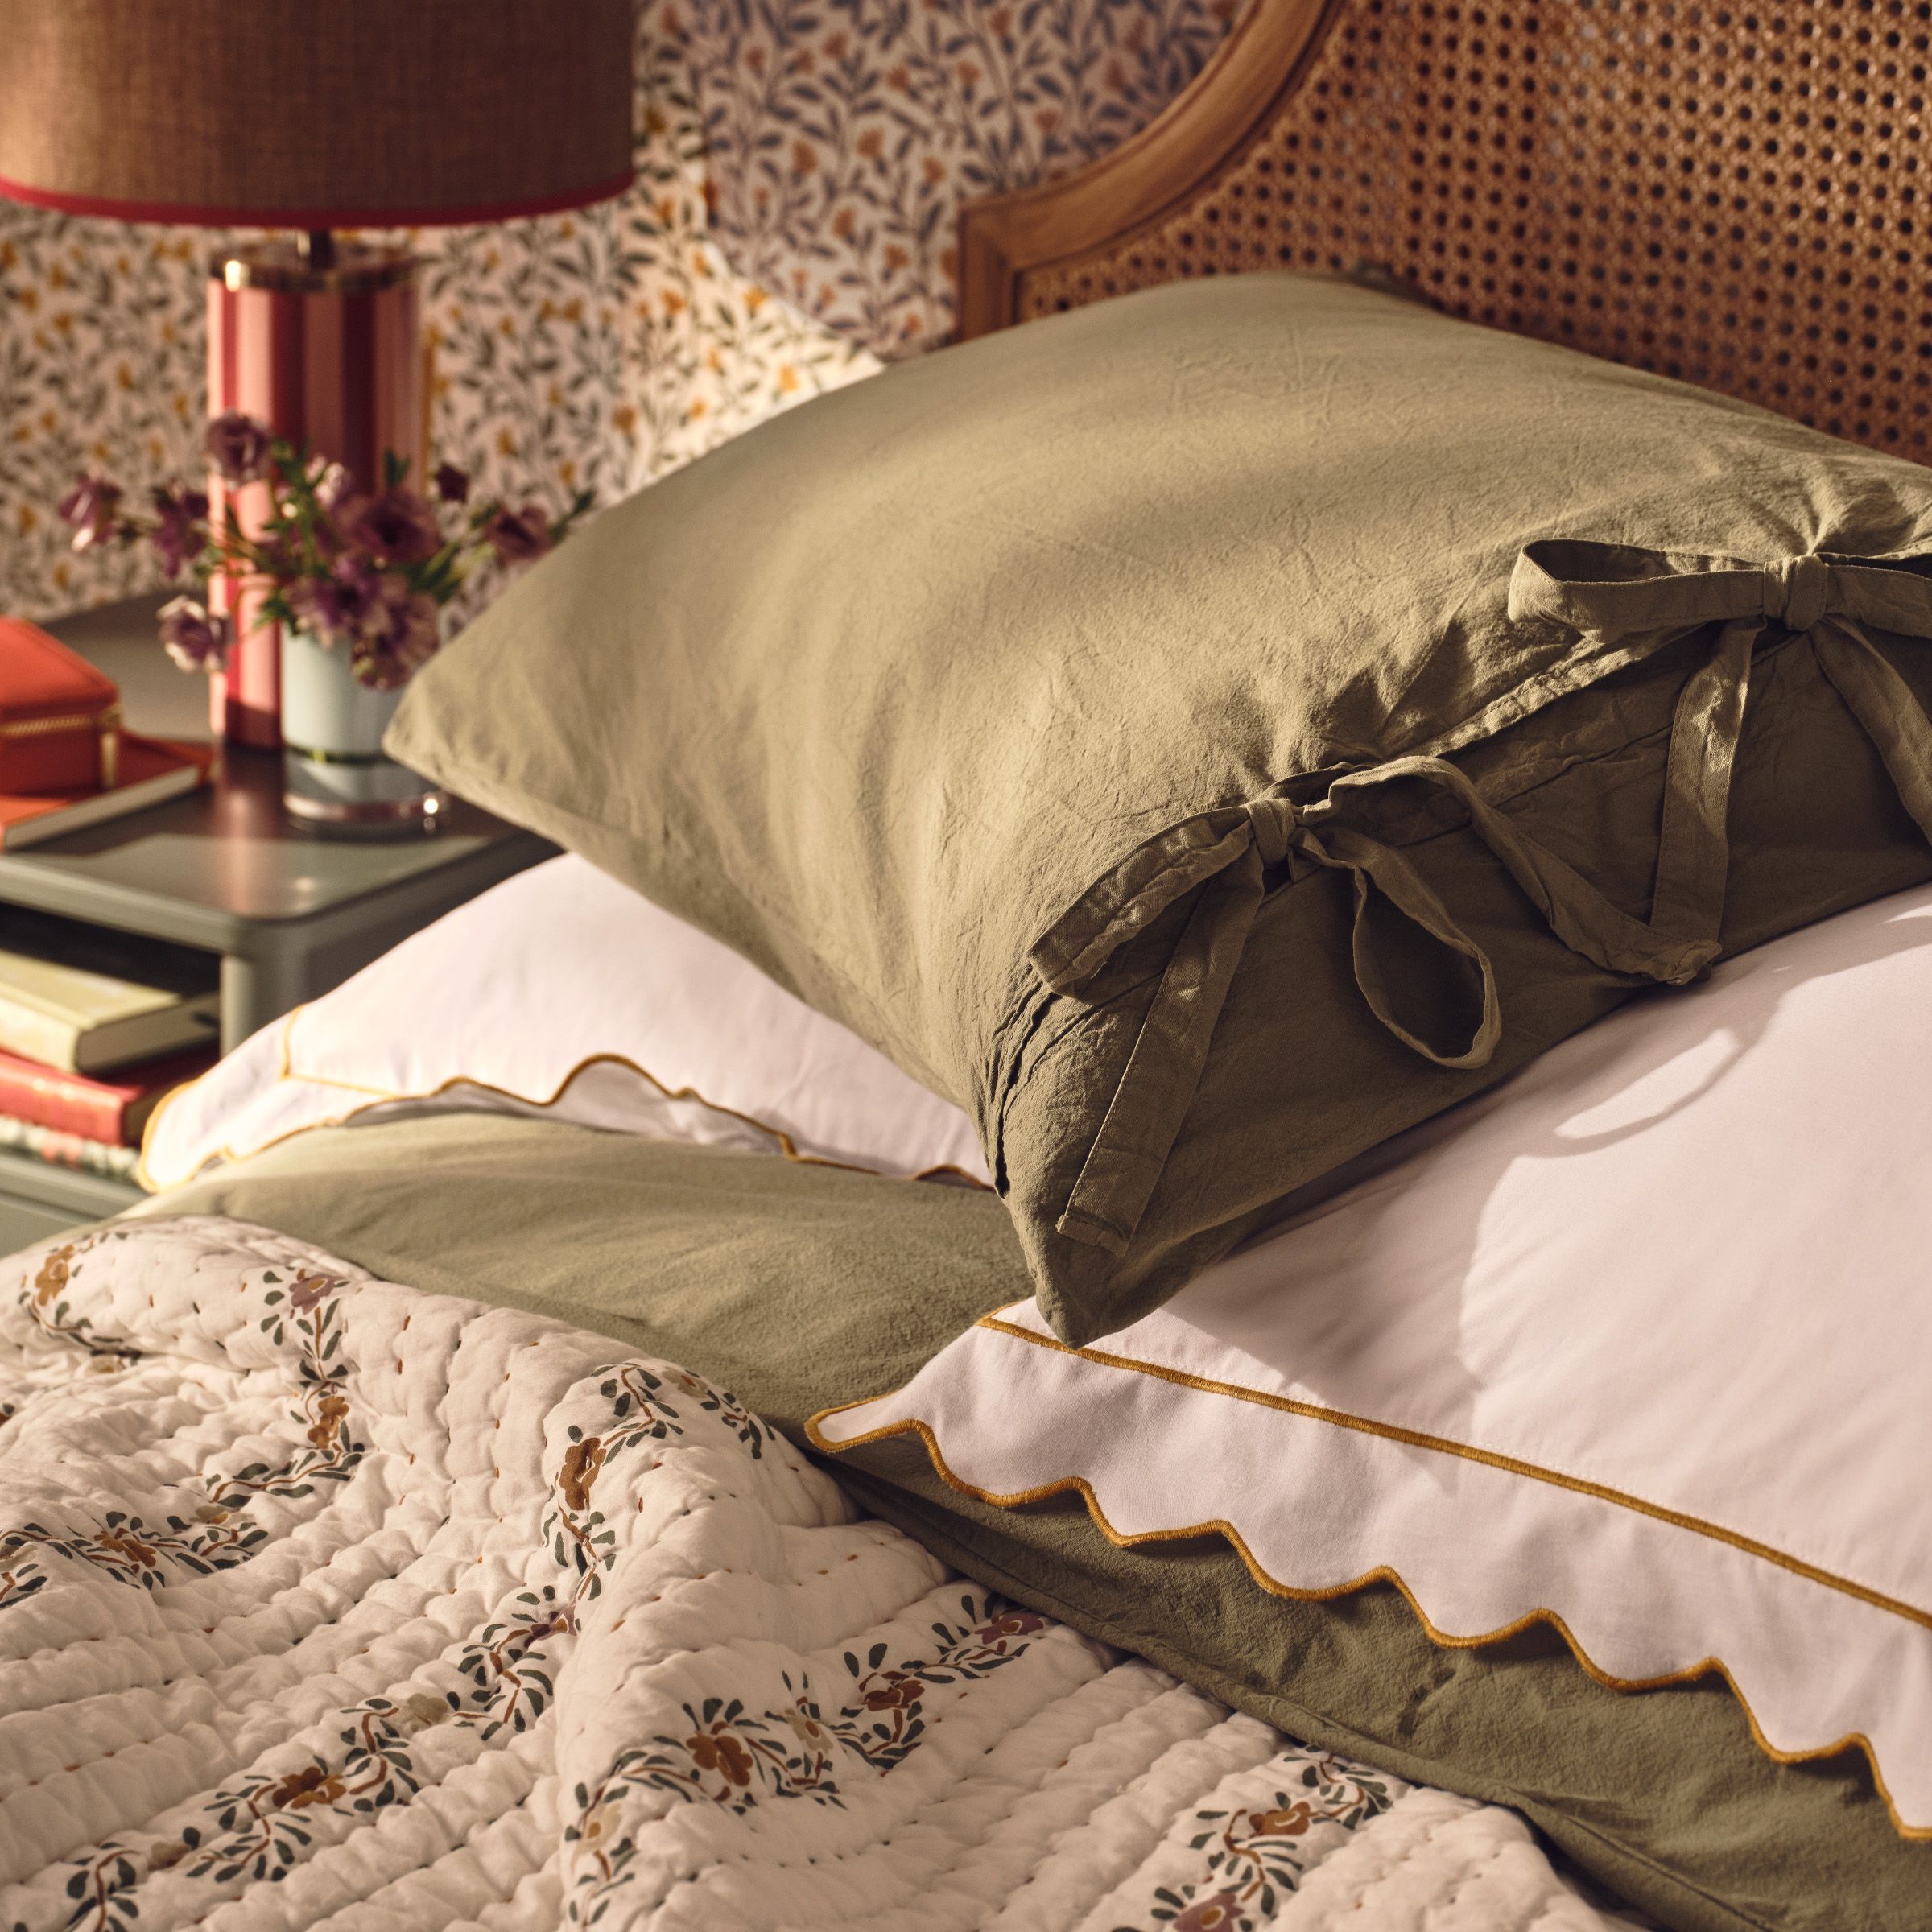 Close up image of a bed with a throw and scatter cushions on the bed